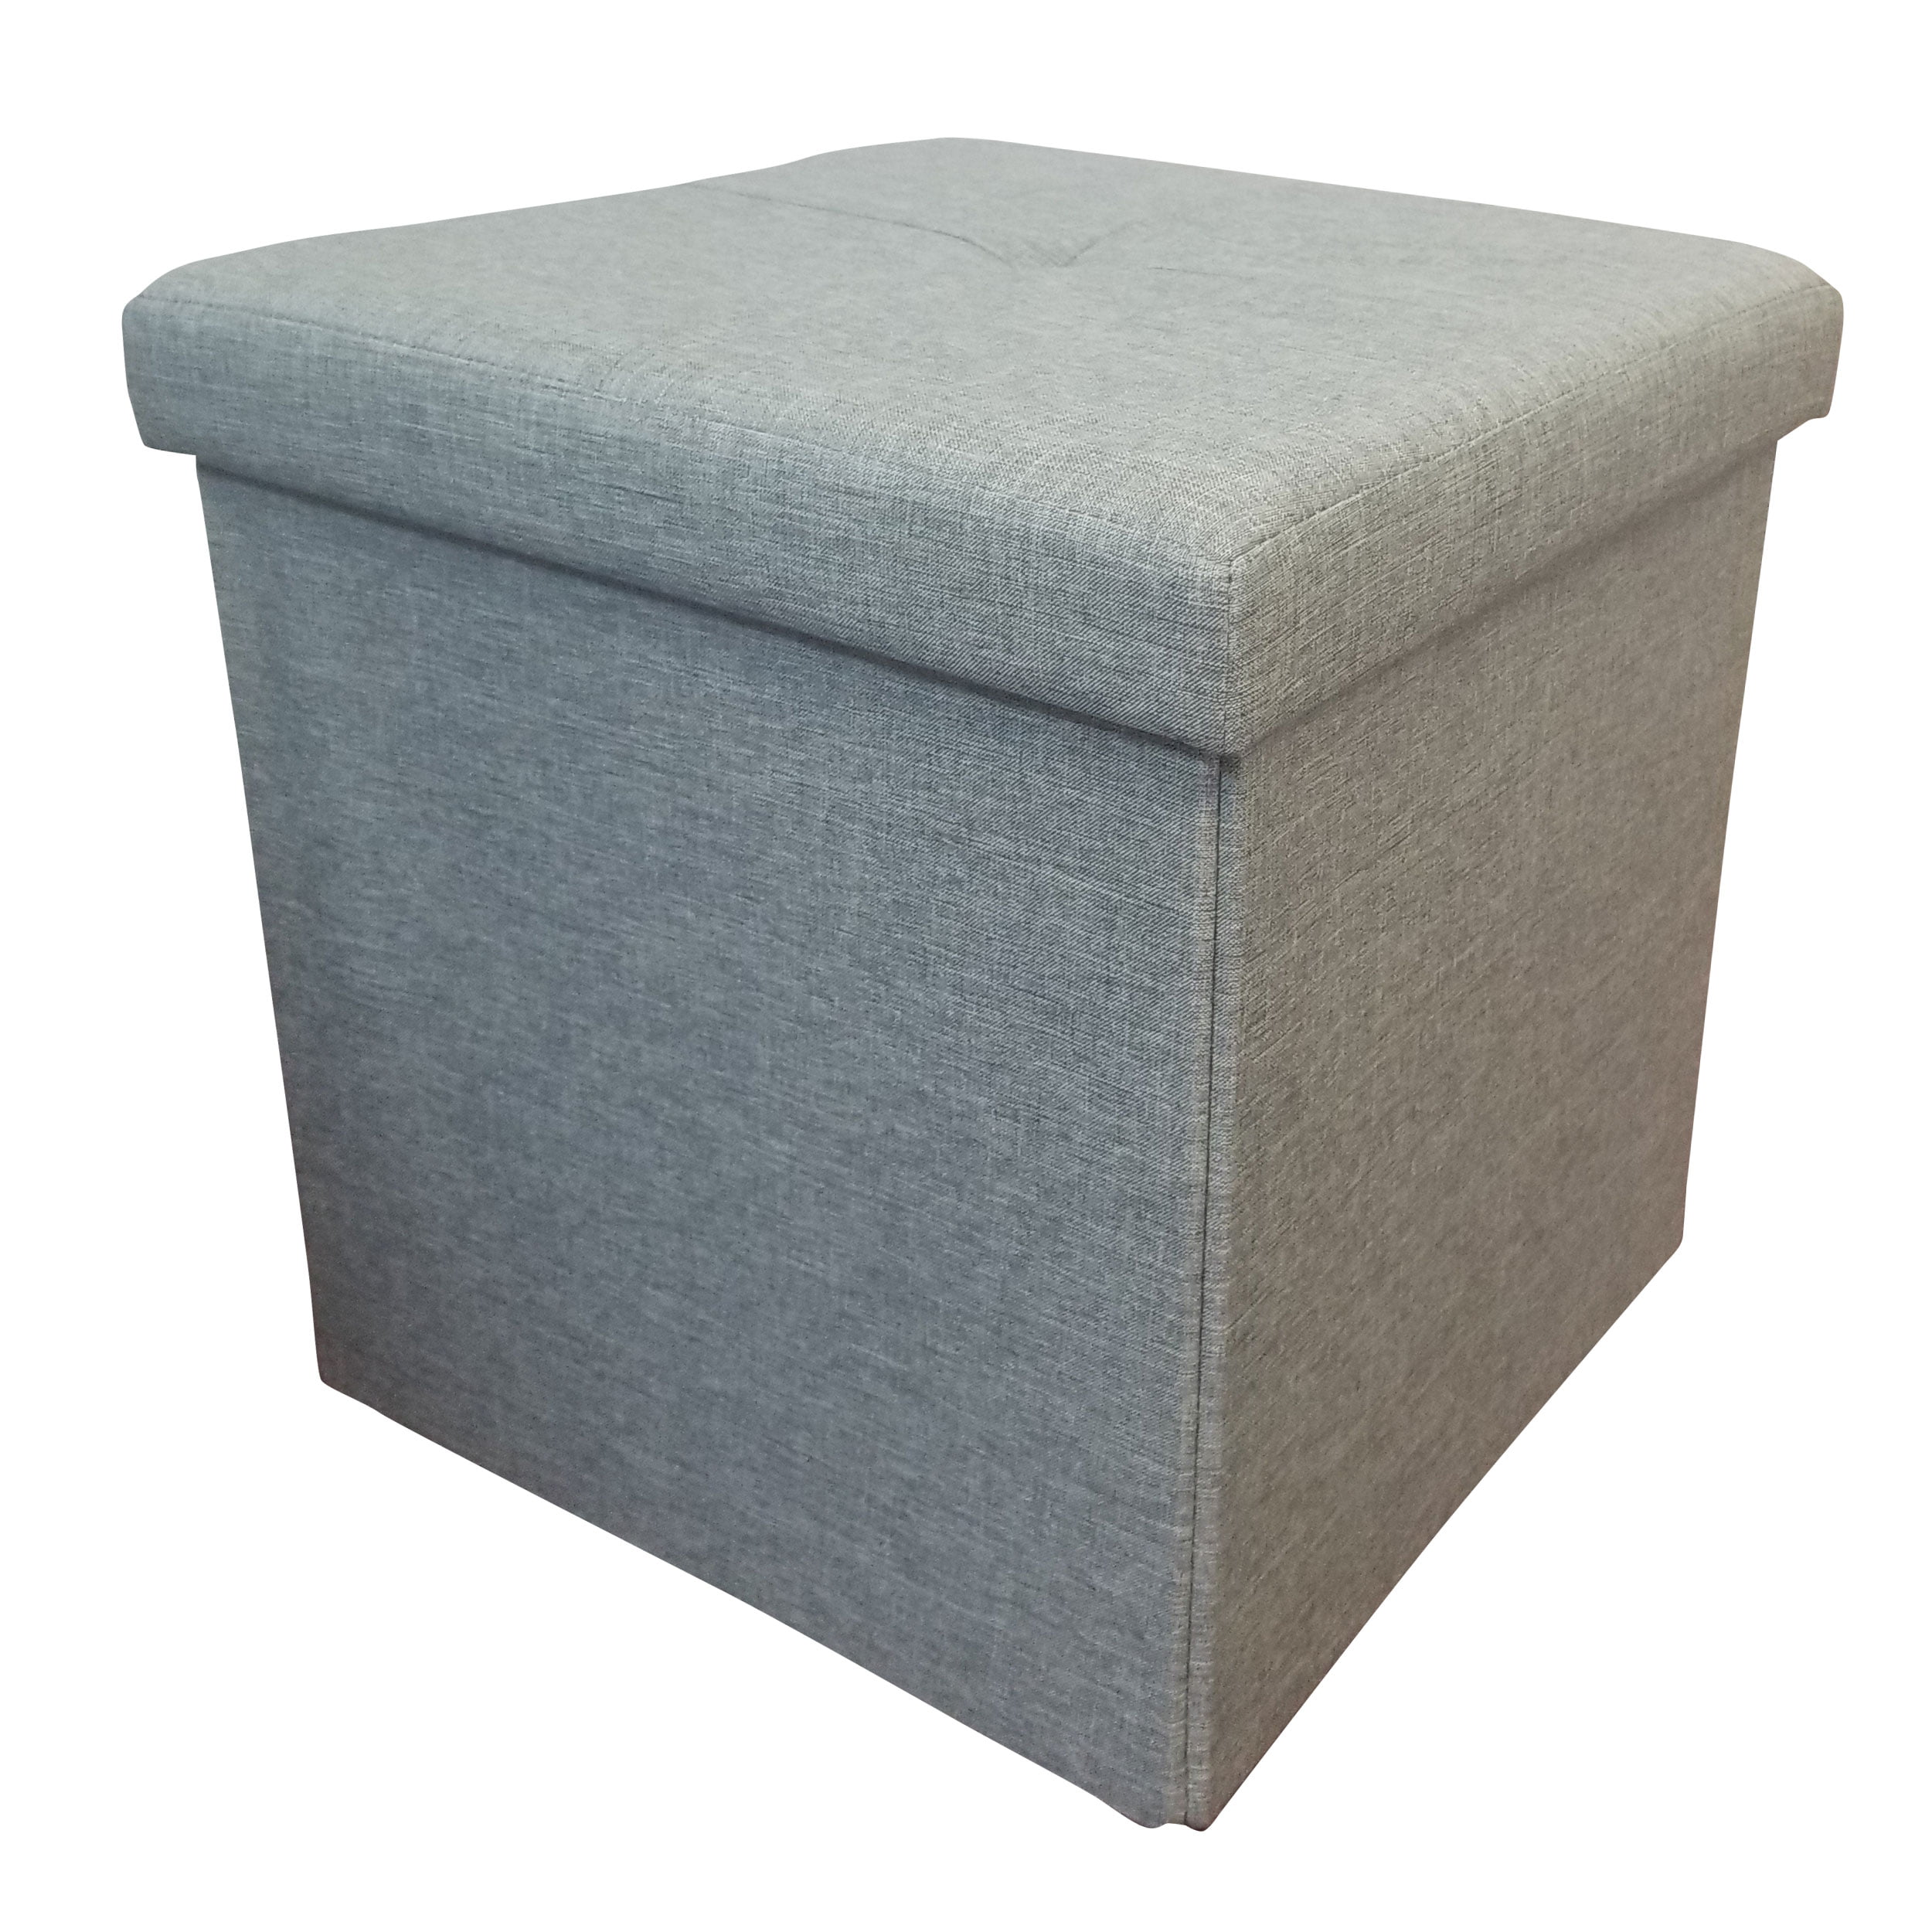 Large Home Source Grey Linen Fabric Storage Ottoman Chest Bedding Blanket Box Hinged Lid